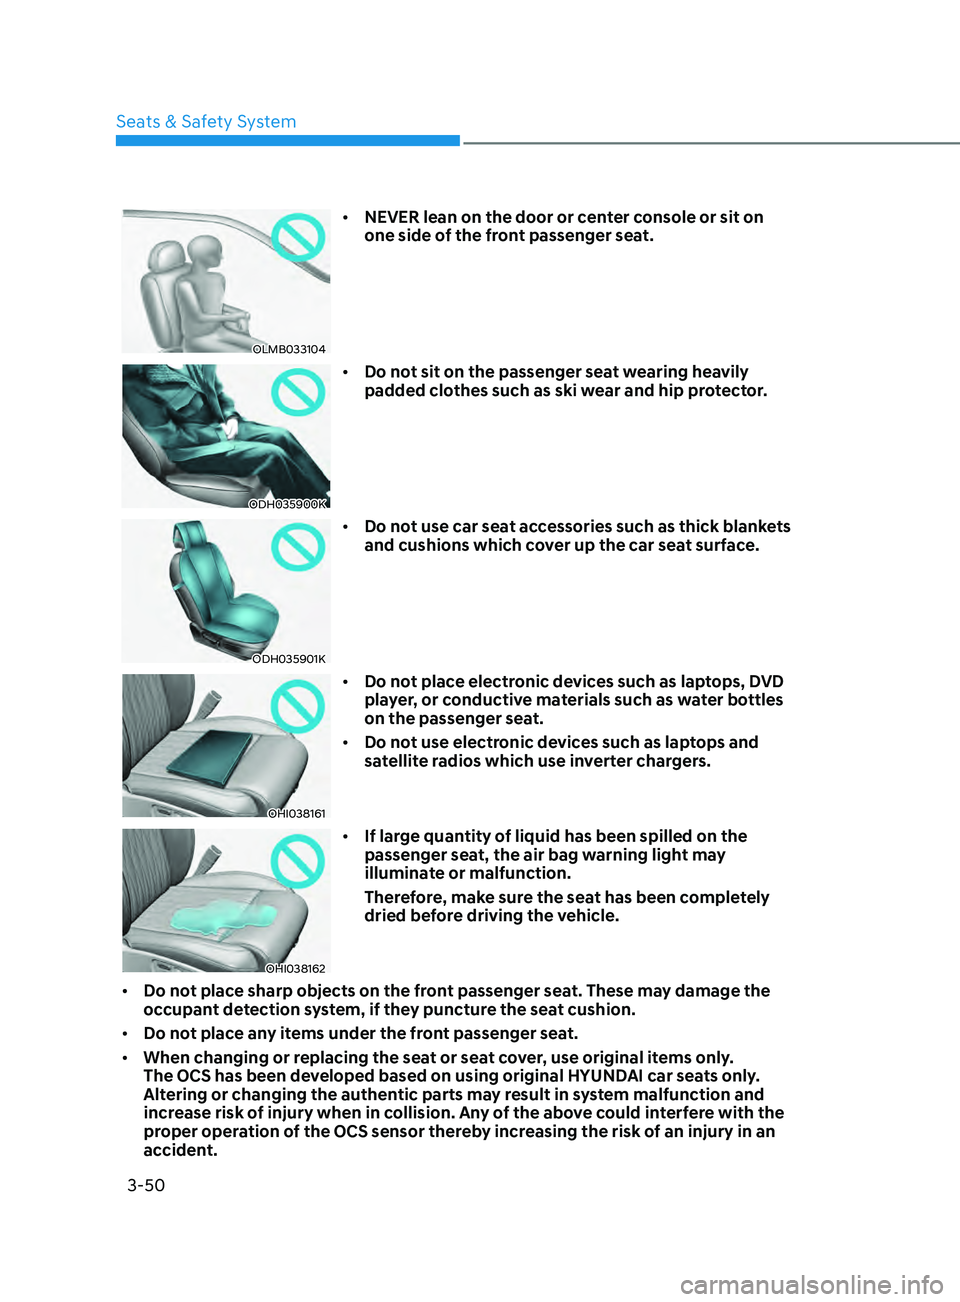 HYUNDAI SONATA 2022  Owners Manual 3-50
OLMB033104
•	NEVER lean on the door or center console or sit on 
one side of the front passenger seat.
ODH035900K
•	Do not sit on the passenger seat wearing heavily 
padded clothes such as sk